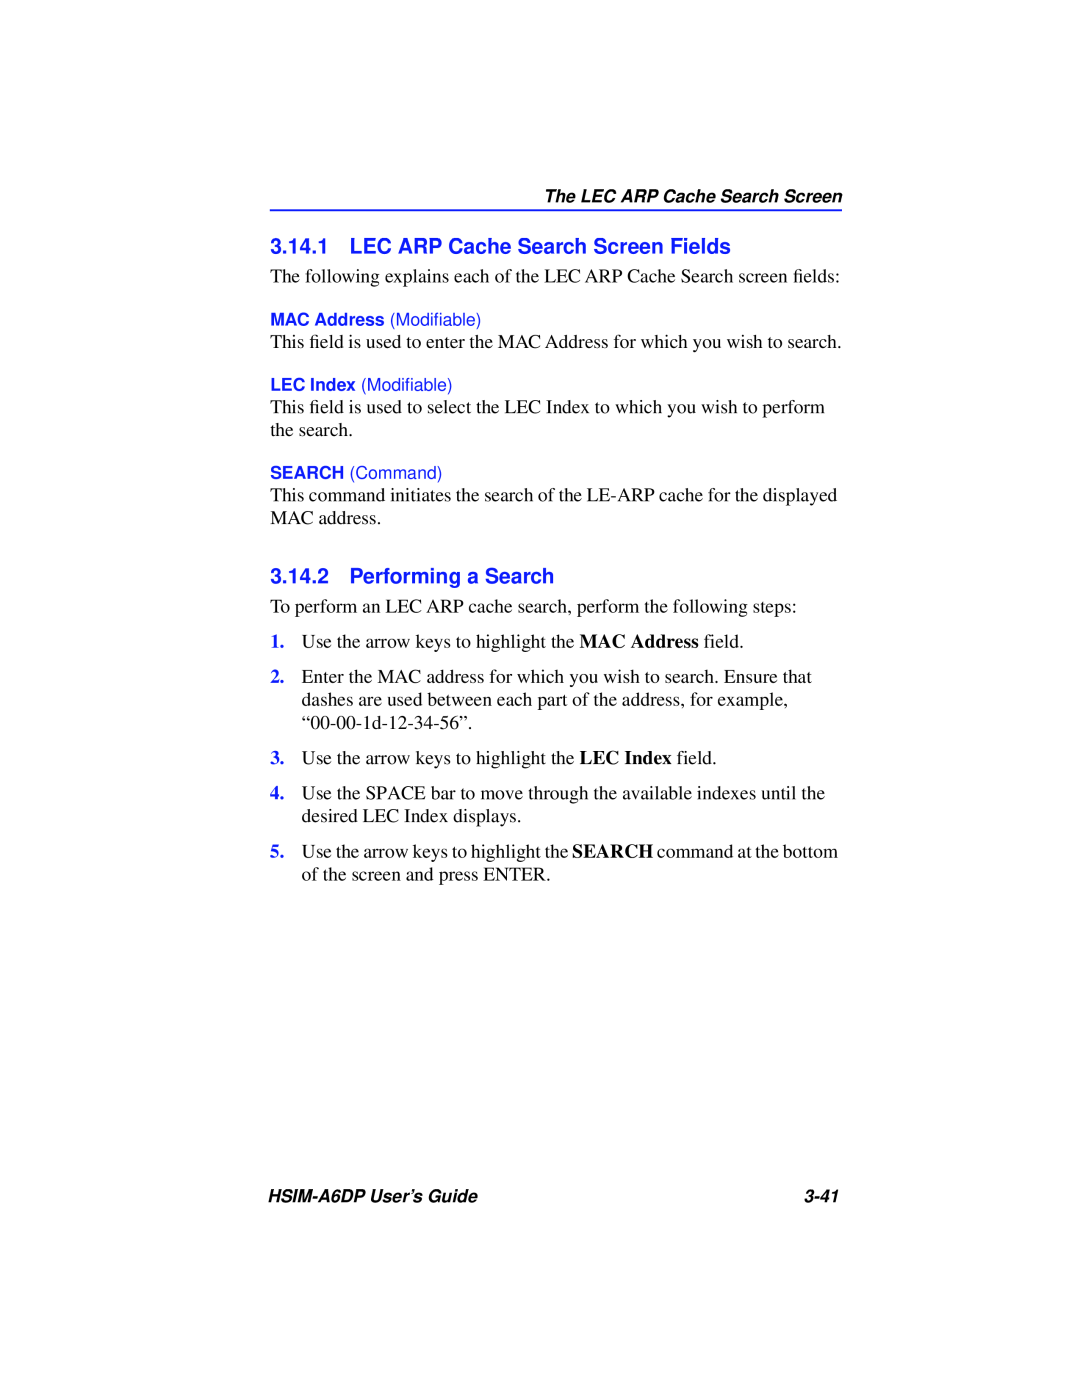 Cabletron Systems HSIM-A6DP manual LEC ARP Cache Search Screen Fields, Performing a Search 